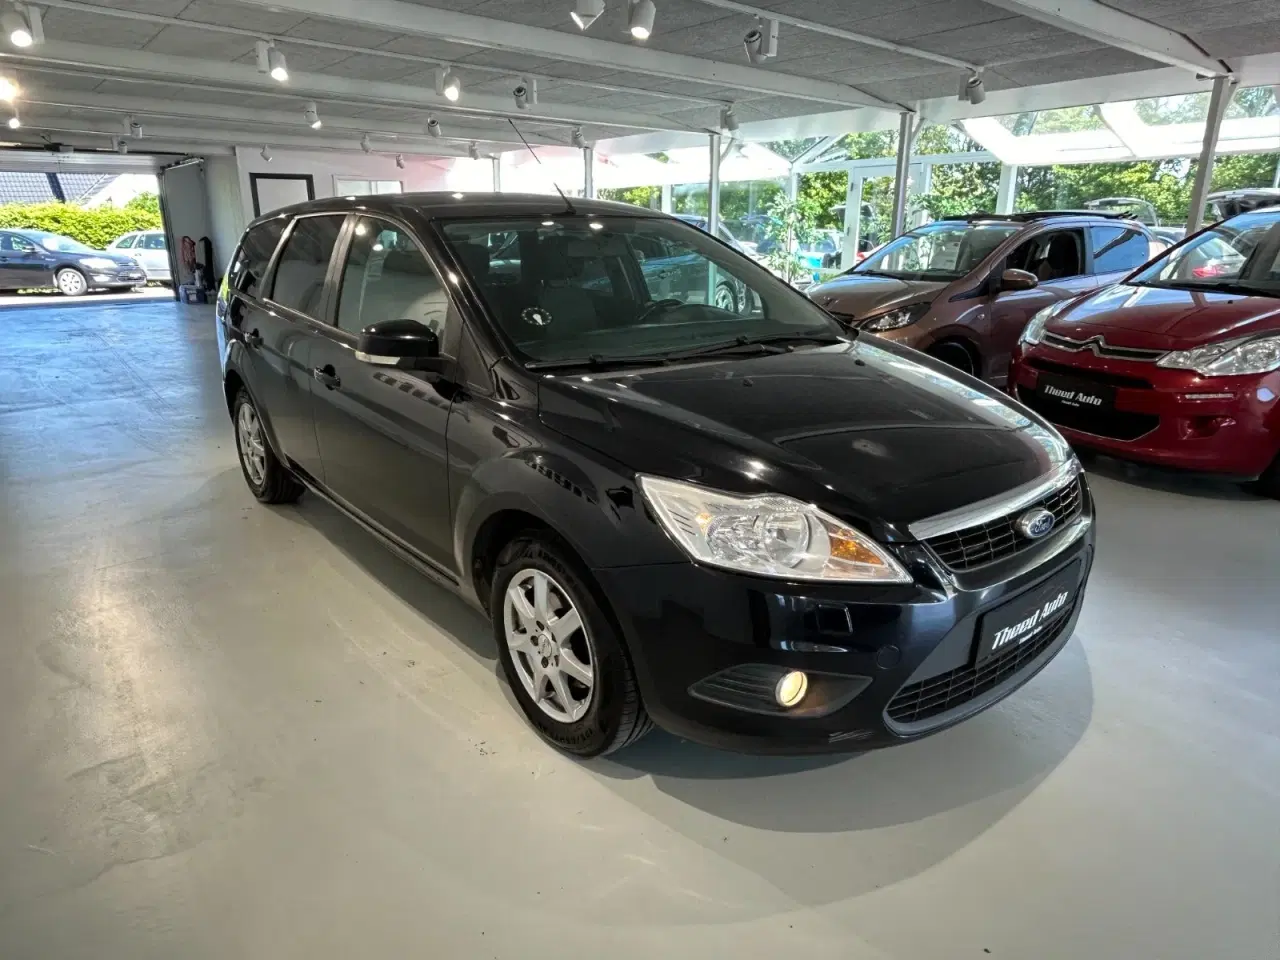 Billede 3 - Ford Focus 1,6 TDCi 109 Trend Collection stc.